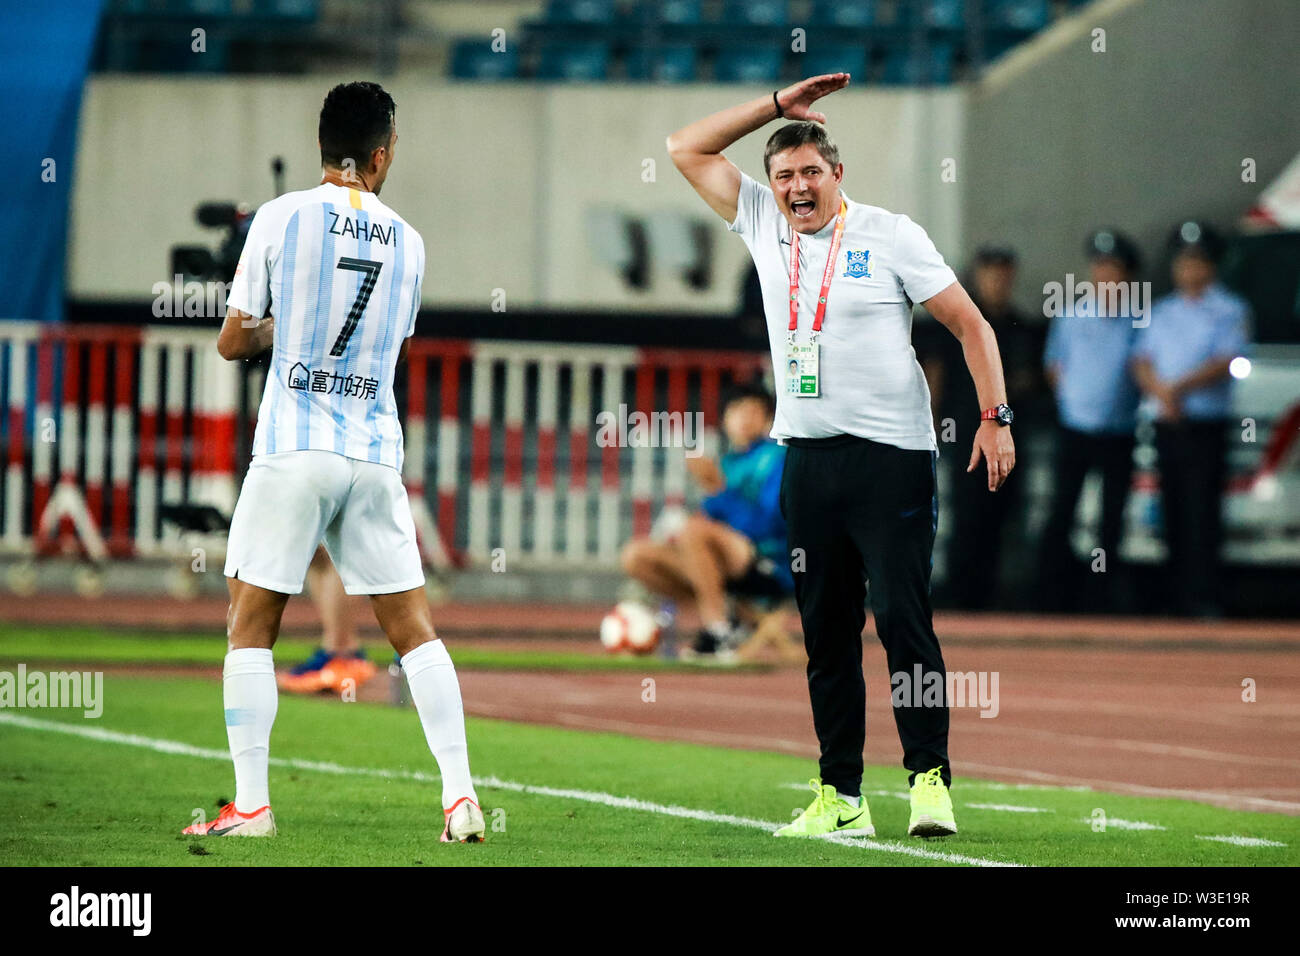 Head coach Dragan Stojkovic of Guangzhou R&F shouts instructions to his players as they compete against Dalian Yifang in their 17th round match during the 2019 Chinese Football Association Super League (CSL) in Dalian city, northeast China's Liaoning province, 12 July 2019. Dalian Yifang defeated Guangzhou R&F 3-2. Stock Photo